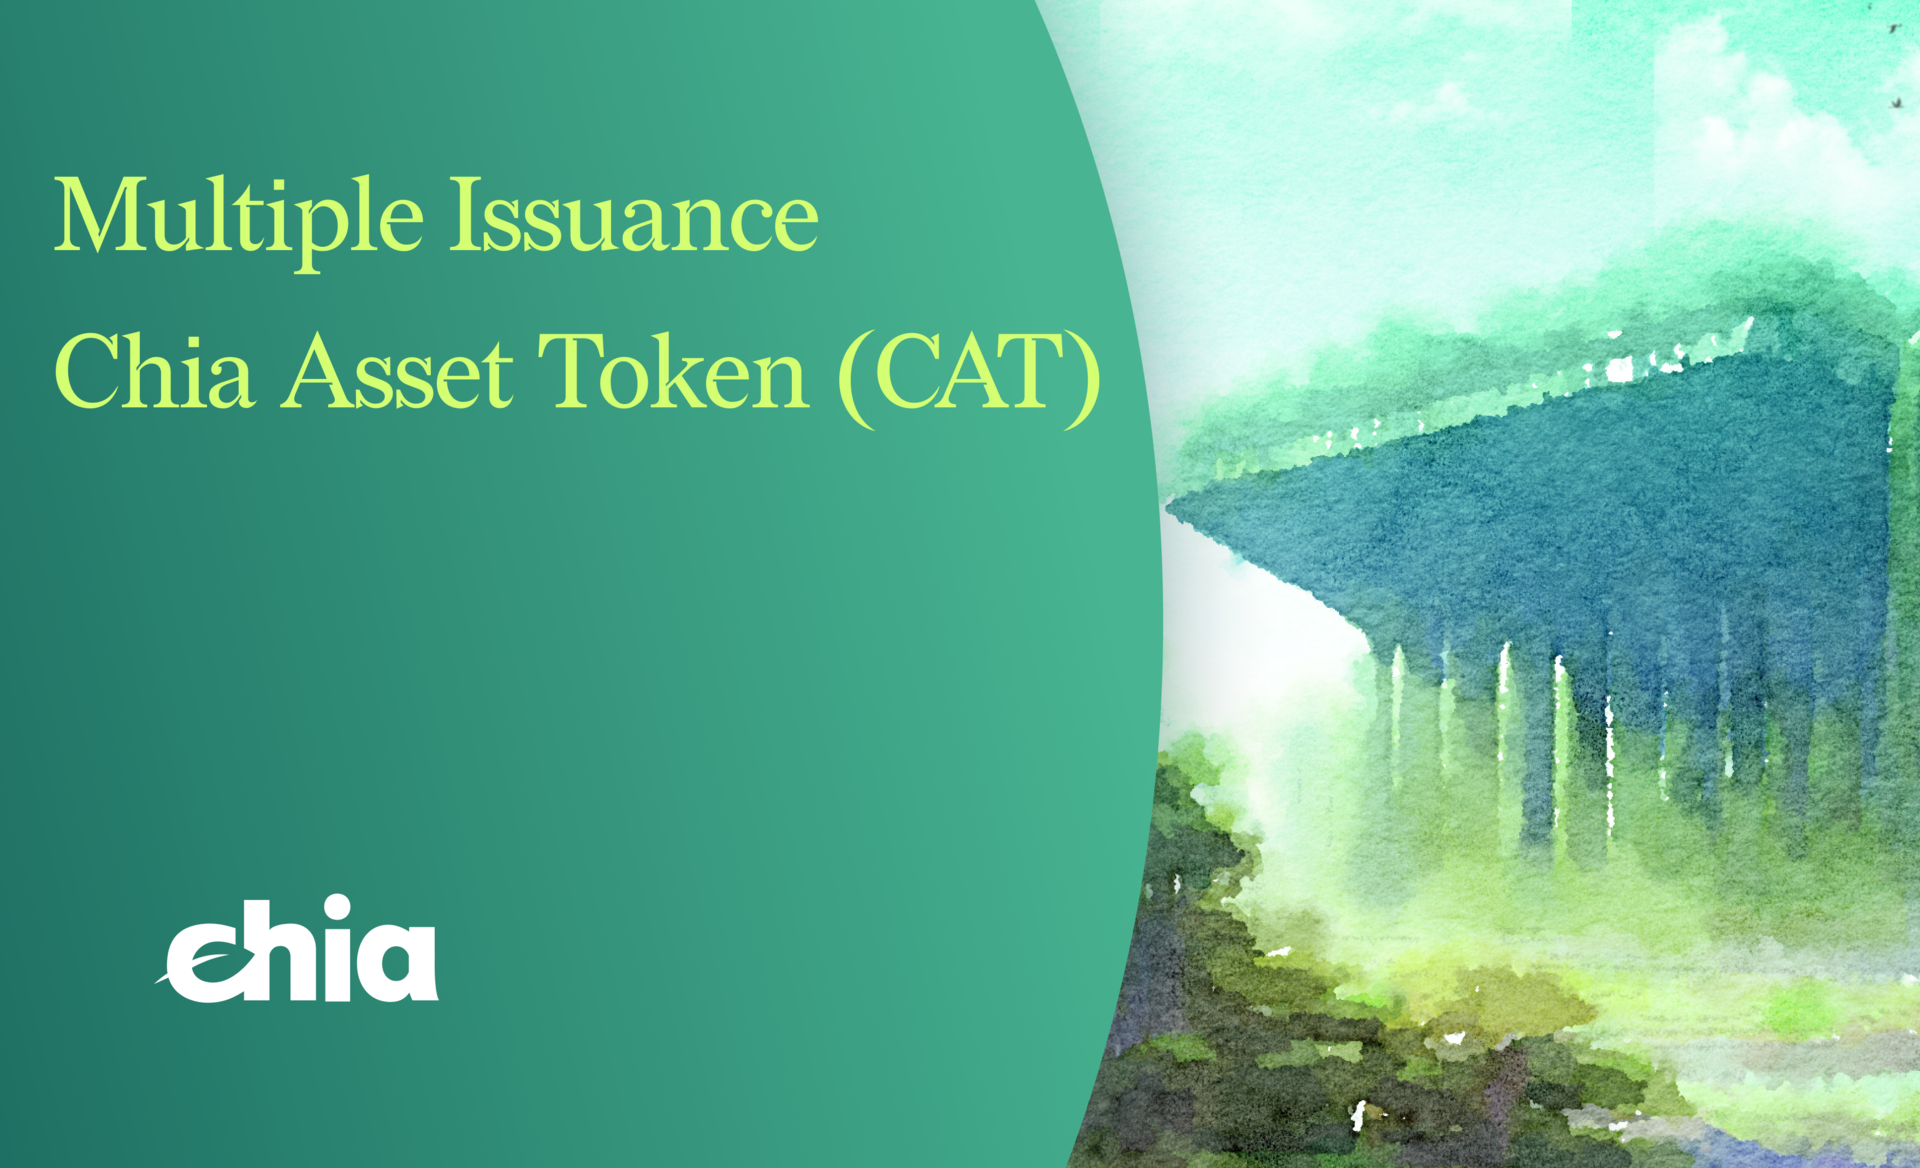 Multiple Issuance CATs